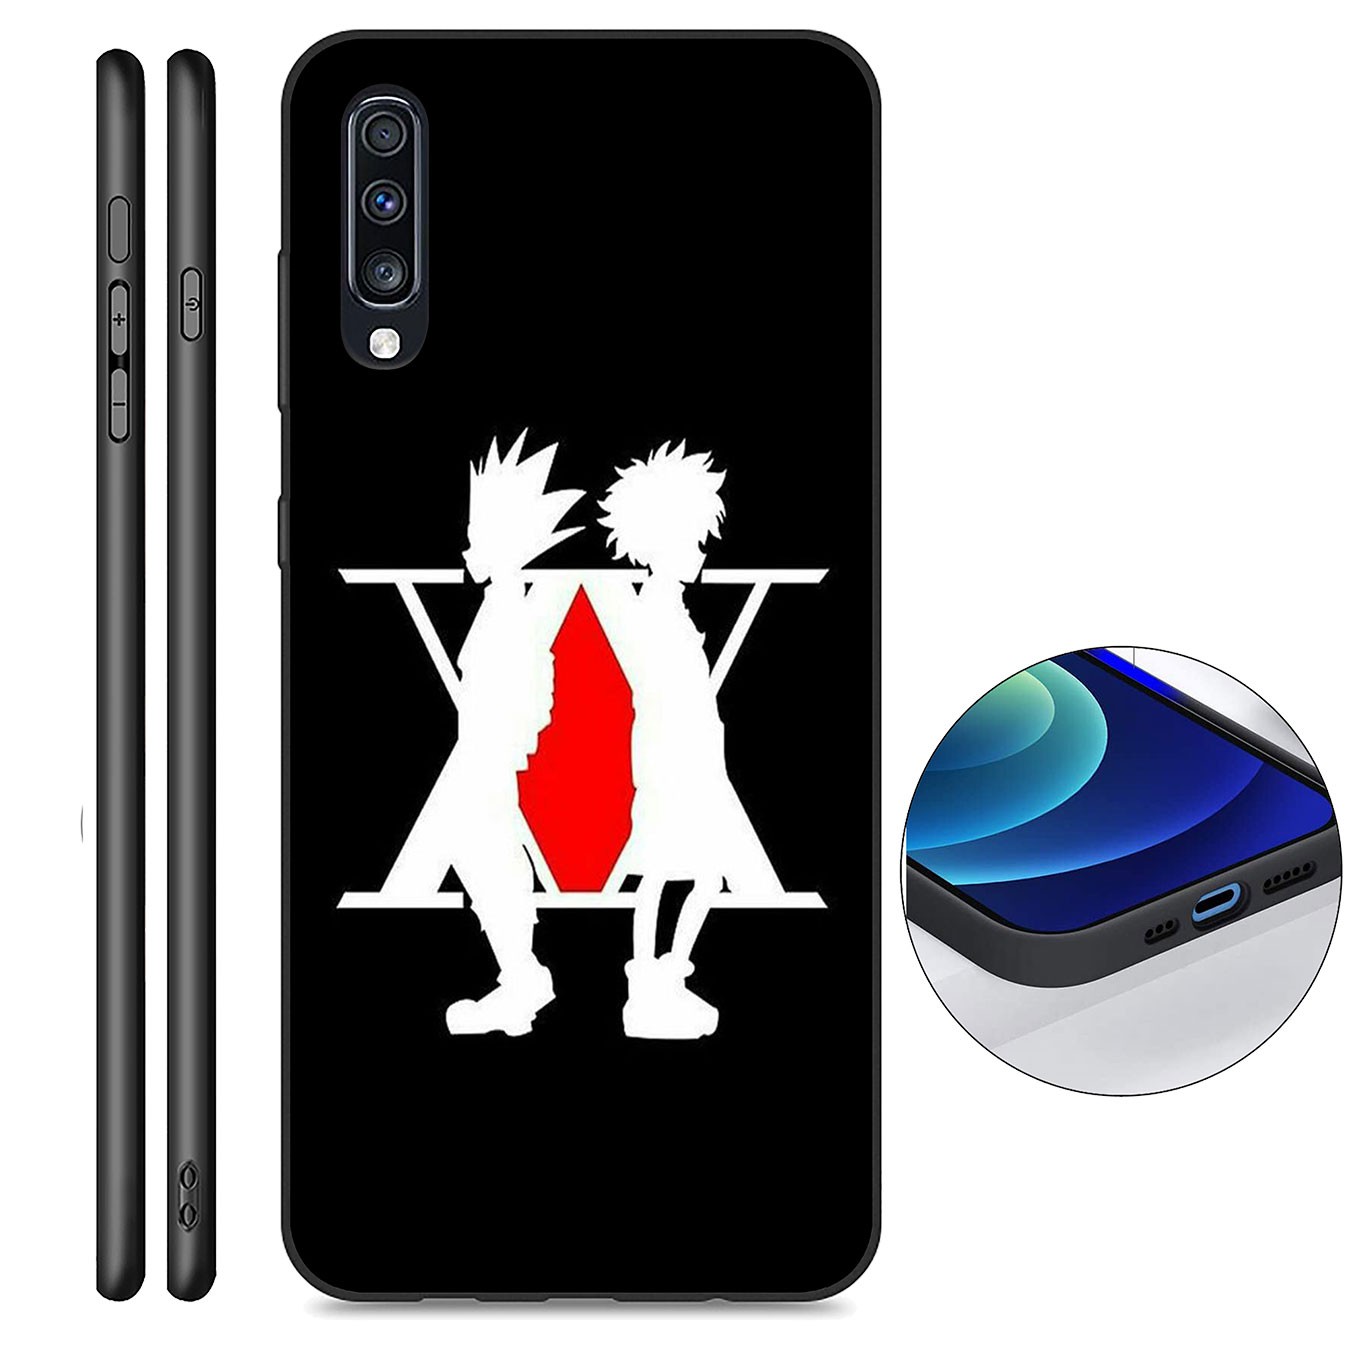 Samsung Galaxy S21 Ultra S8 Plus F62 M62 A2 A32 A52 A72 S21+ S8+ S21Plus Casing Soft Silicone Phone Case Hunter × Hunter Cover